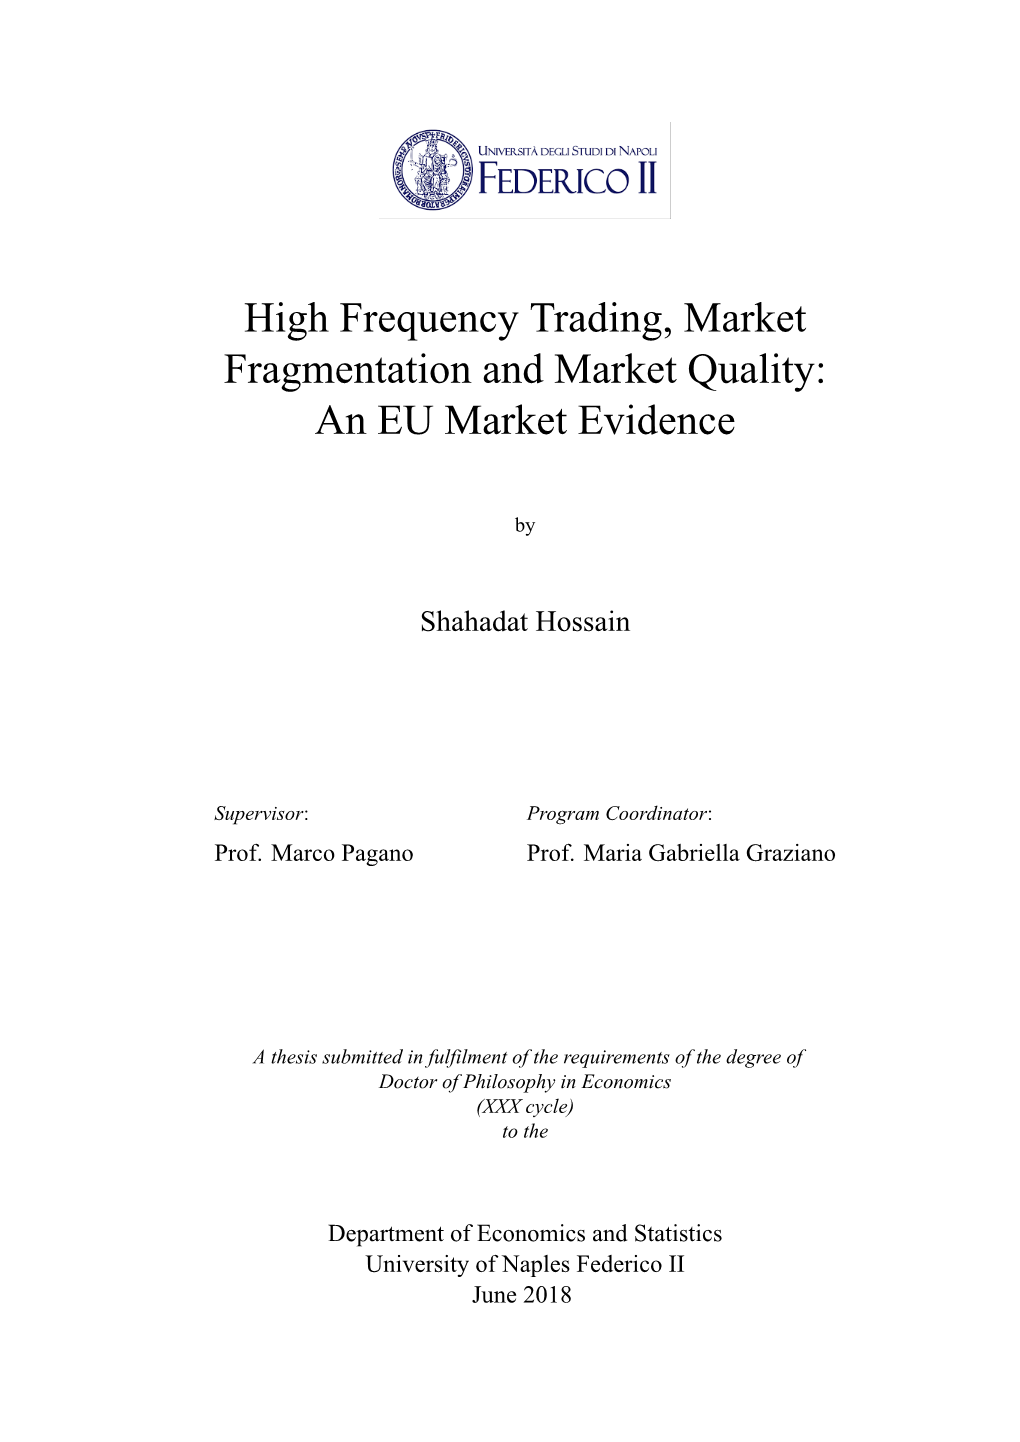 High Frequency Trading, Market Fragmentation and Market Quality: an EU Market Evidence